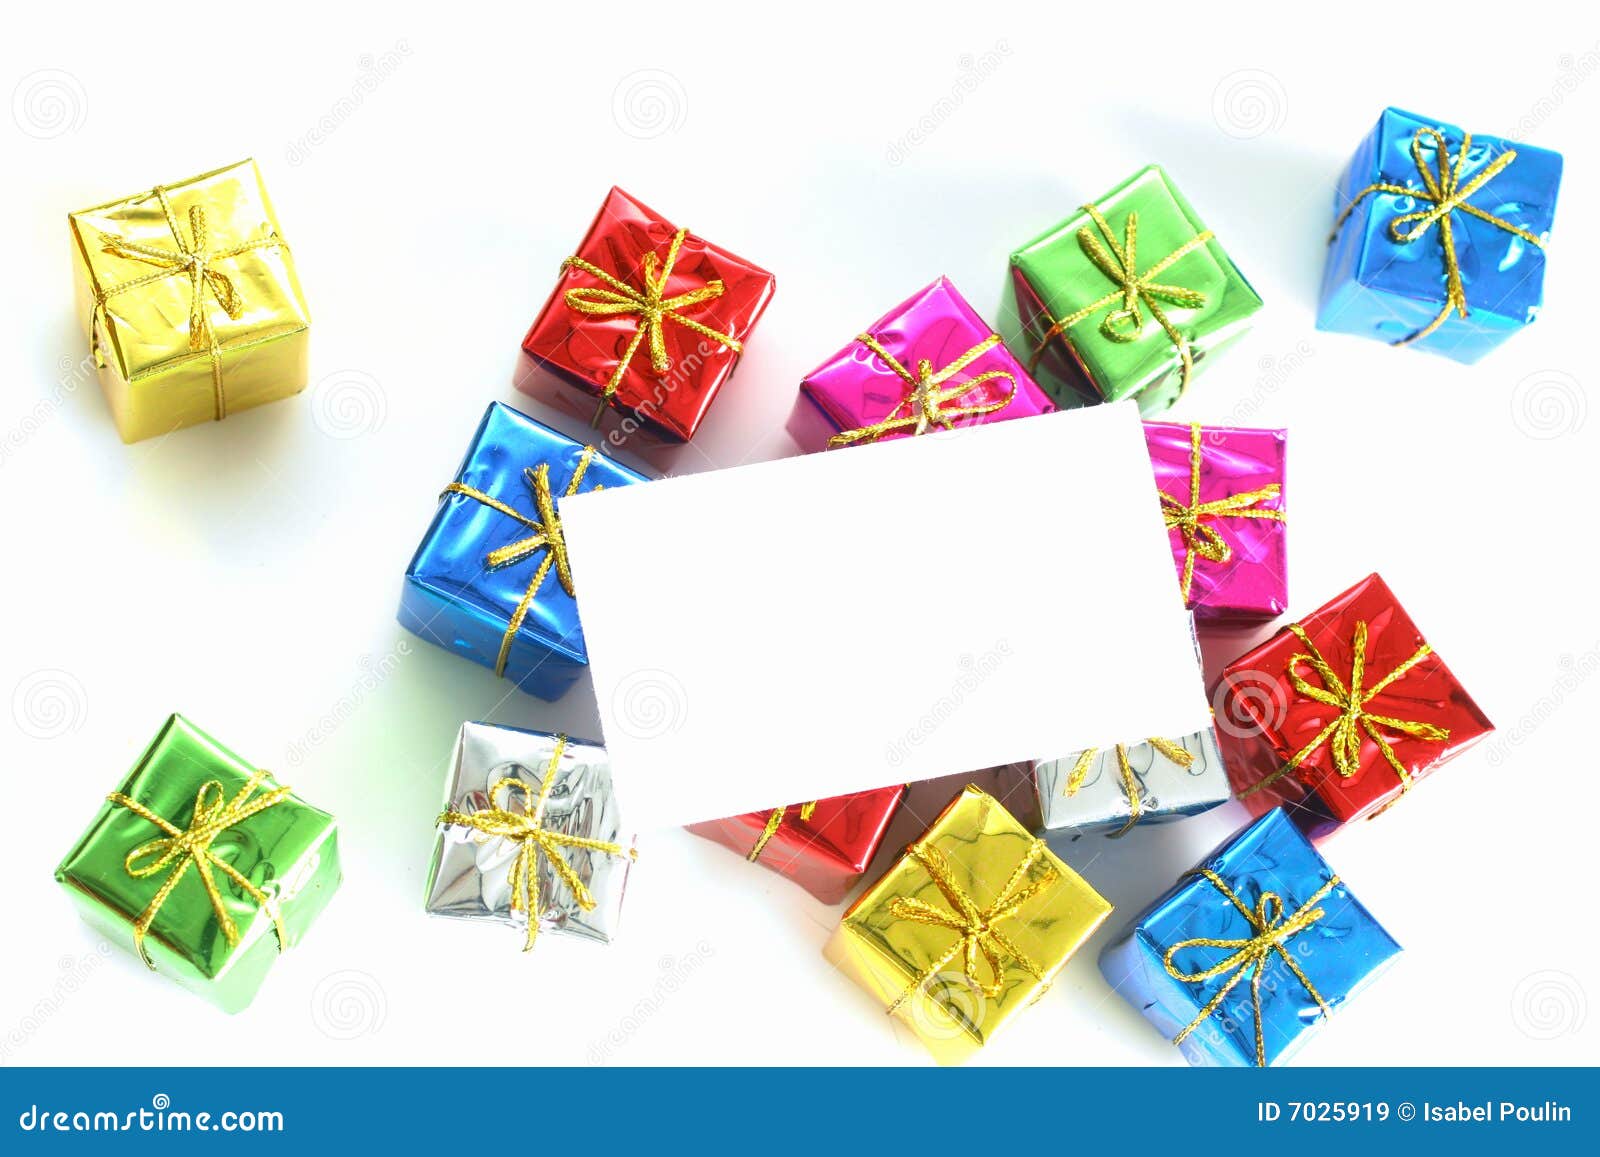 blank-card-on-gifts-stock-image-image-of-card-business-7025919